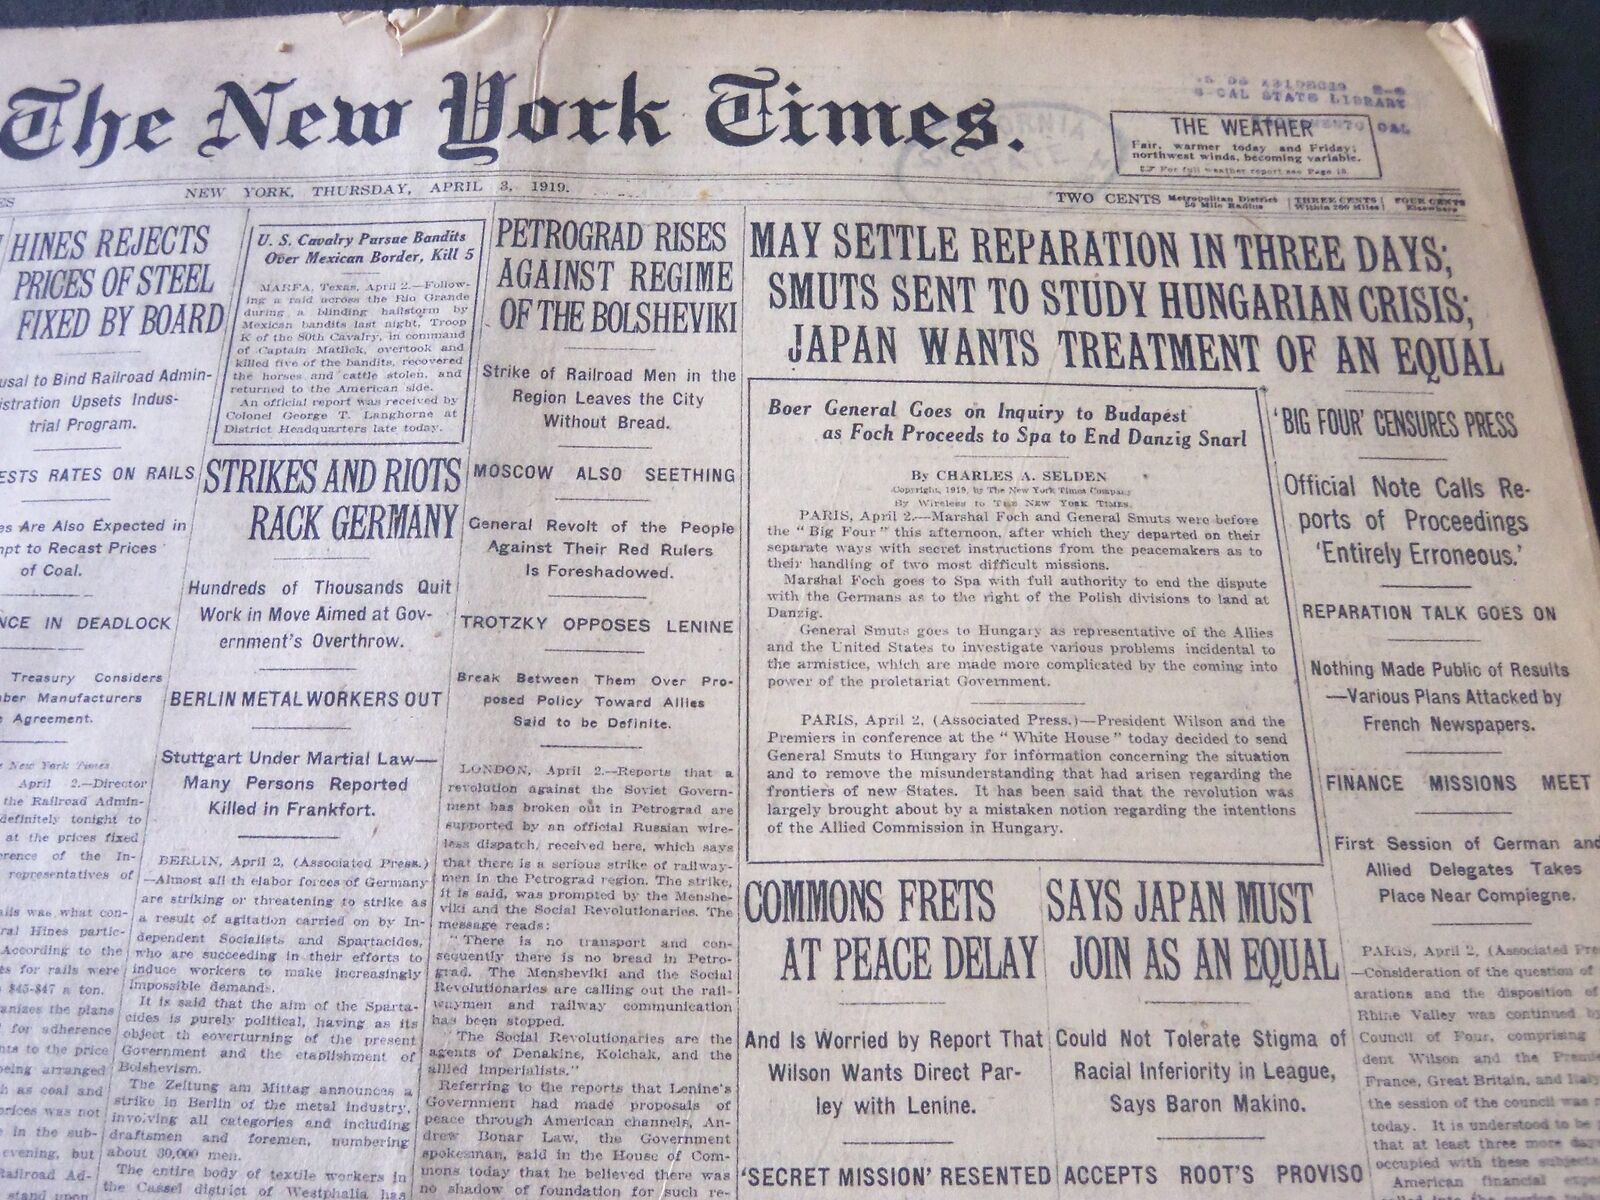 1919 APRIL 3 NEW YORK TIMES - MAY SETTLE REPARATION IN THREE DAYS - NT 6220